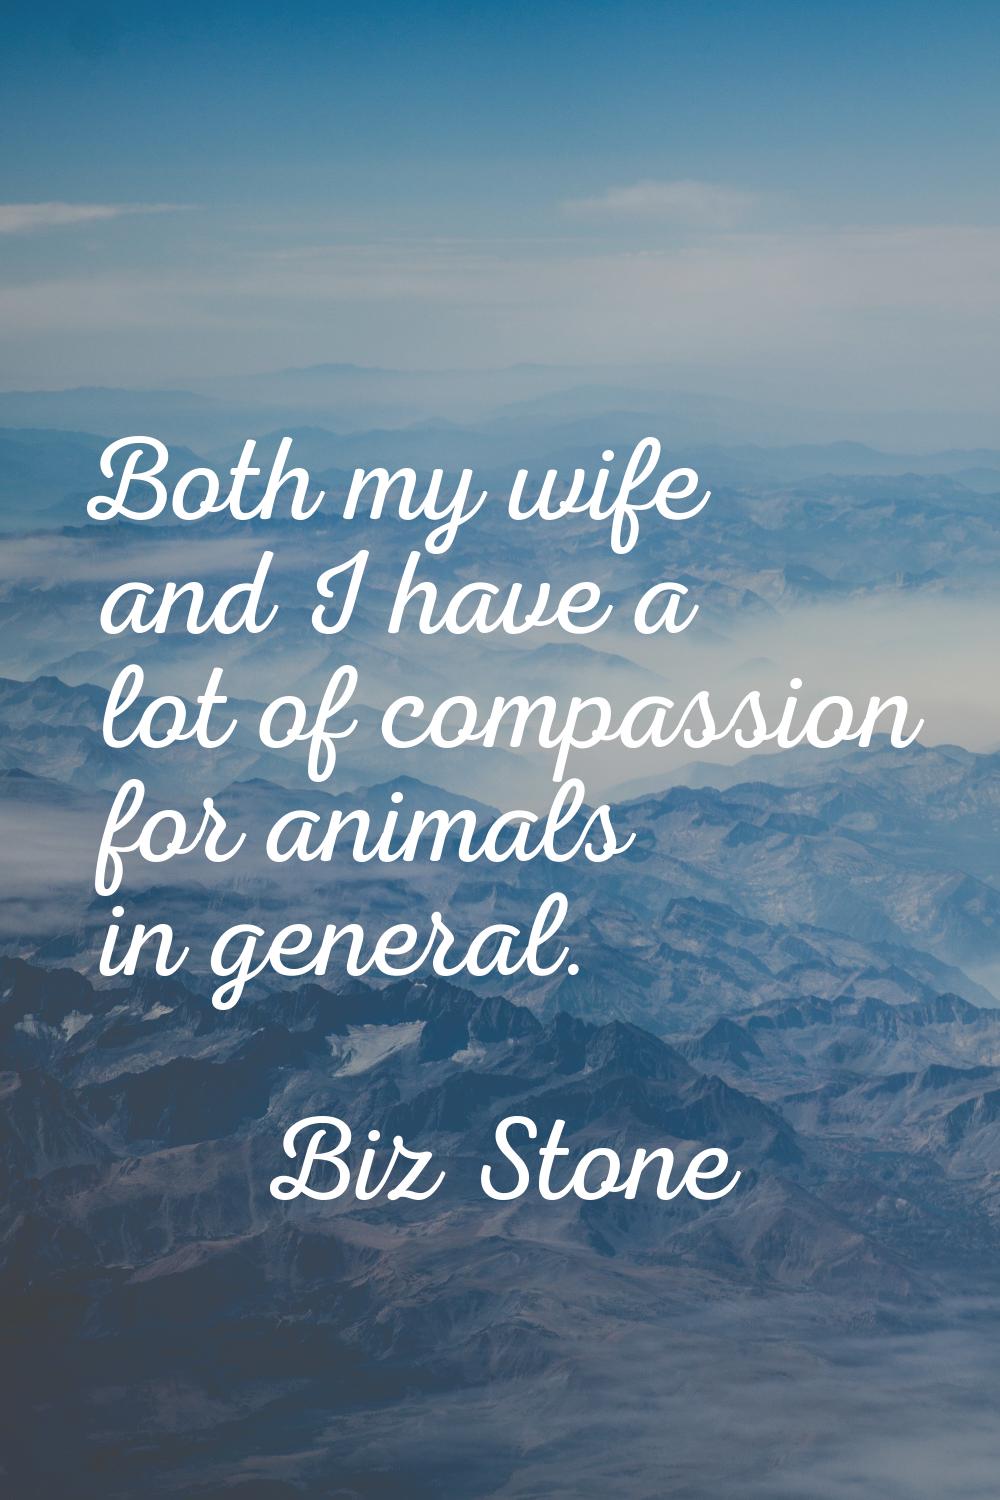 Both my wife and I have a lot of compassion for animals in general.